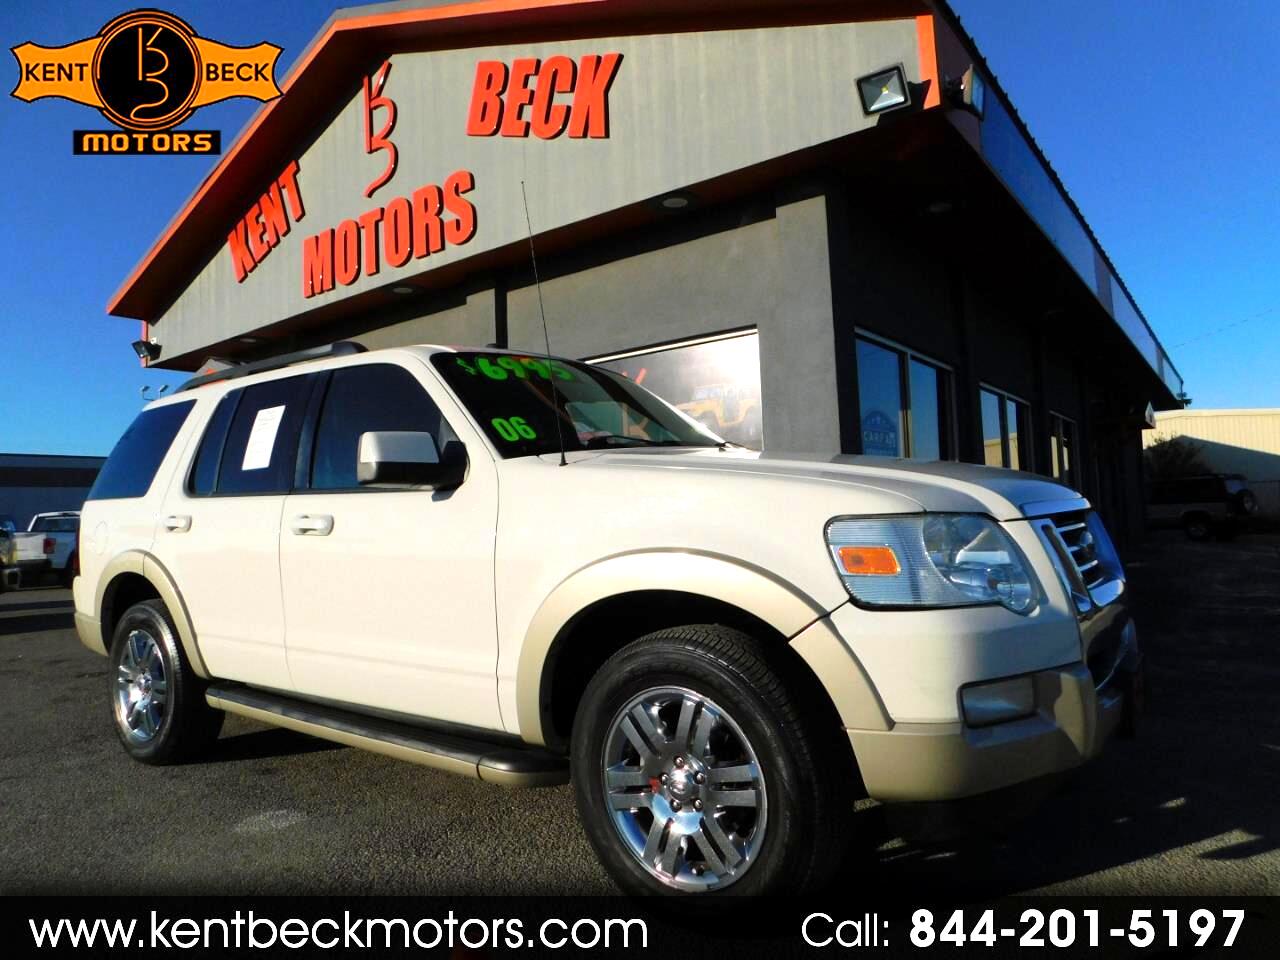 Used 2009 Ford Explorer Eddie Bauer 4 0l 2wd For Sale In